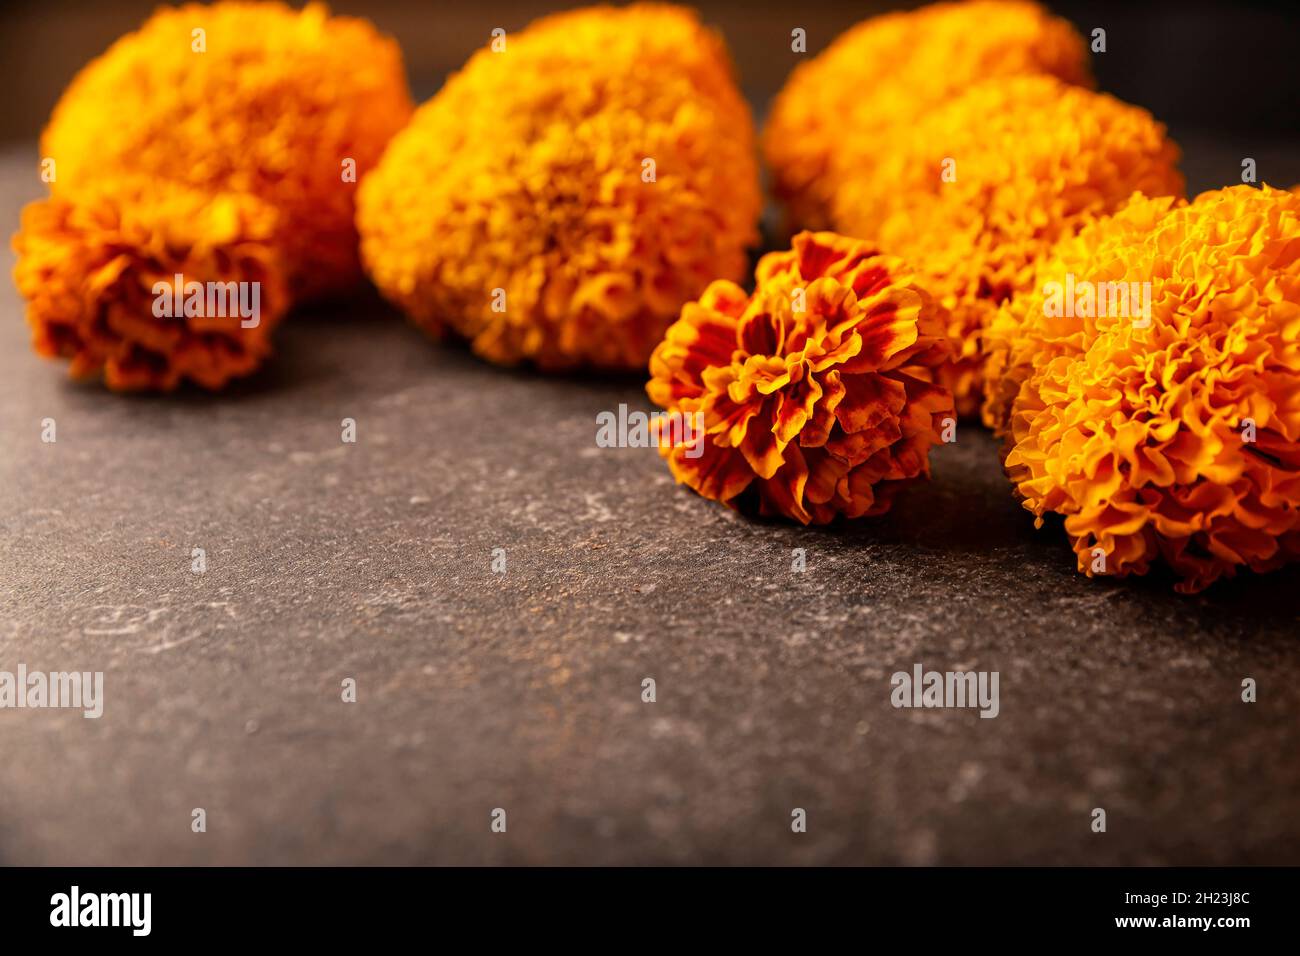 Cempasuchil orange flowers or Marigold. (Tagetes erecta) Traditionally used  in altars for the celebration of the day of the dead in Mexico Stock Photo  - Alamy